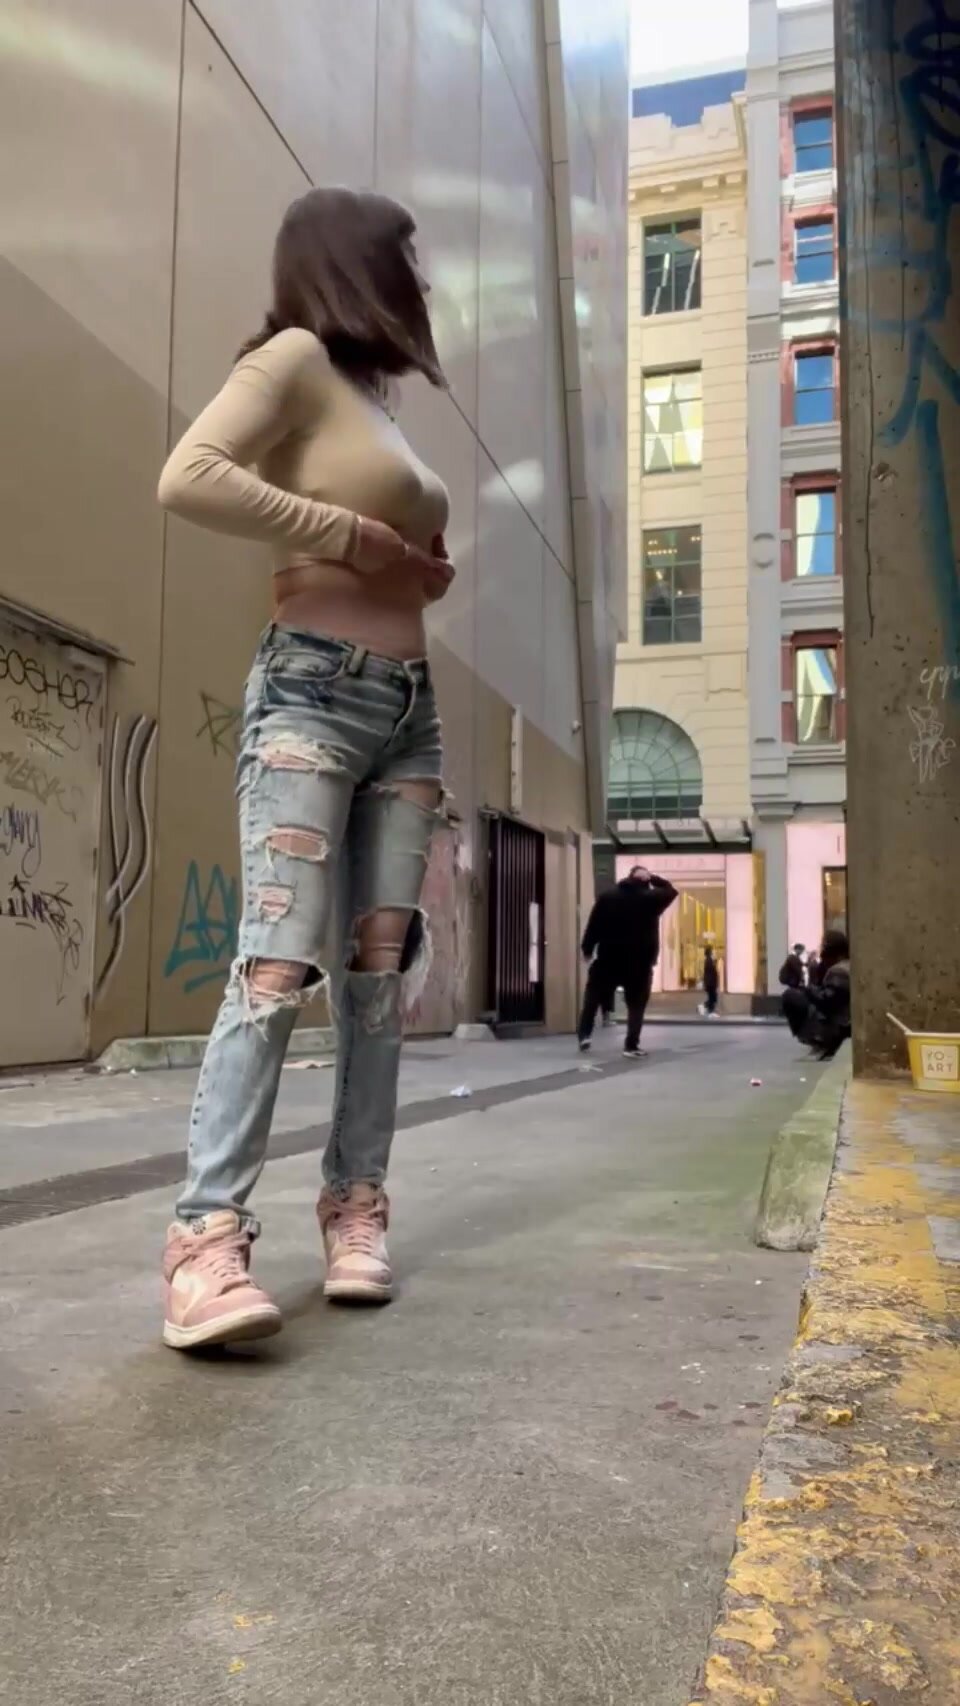 went to Melbourne for a holiday and had to bounce my tits in a laneway